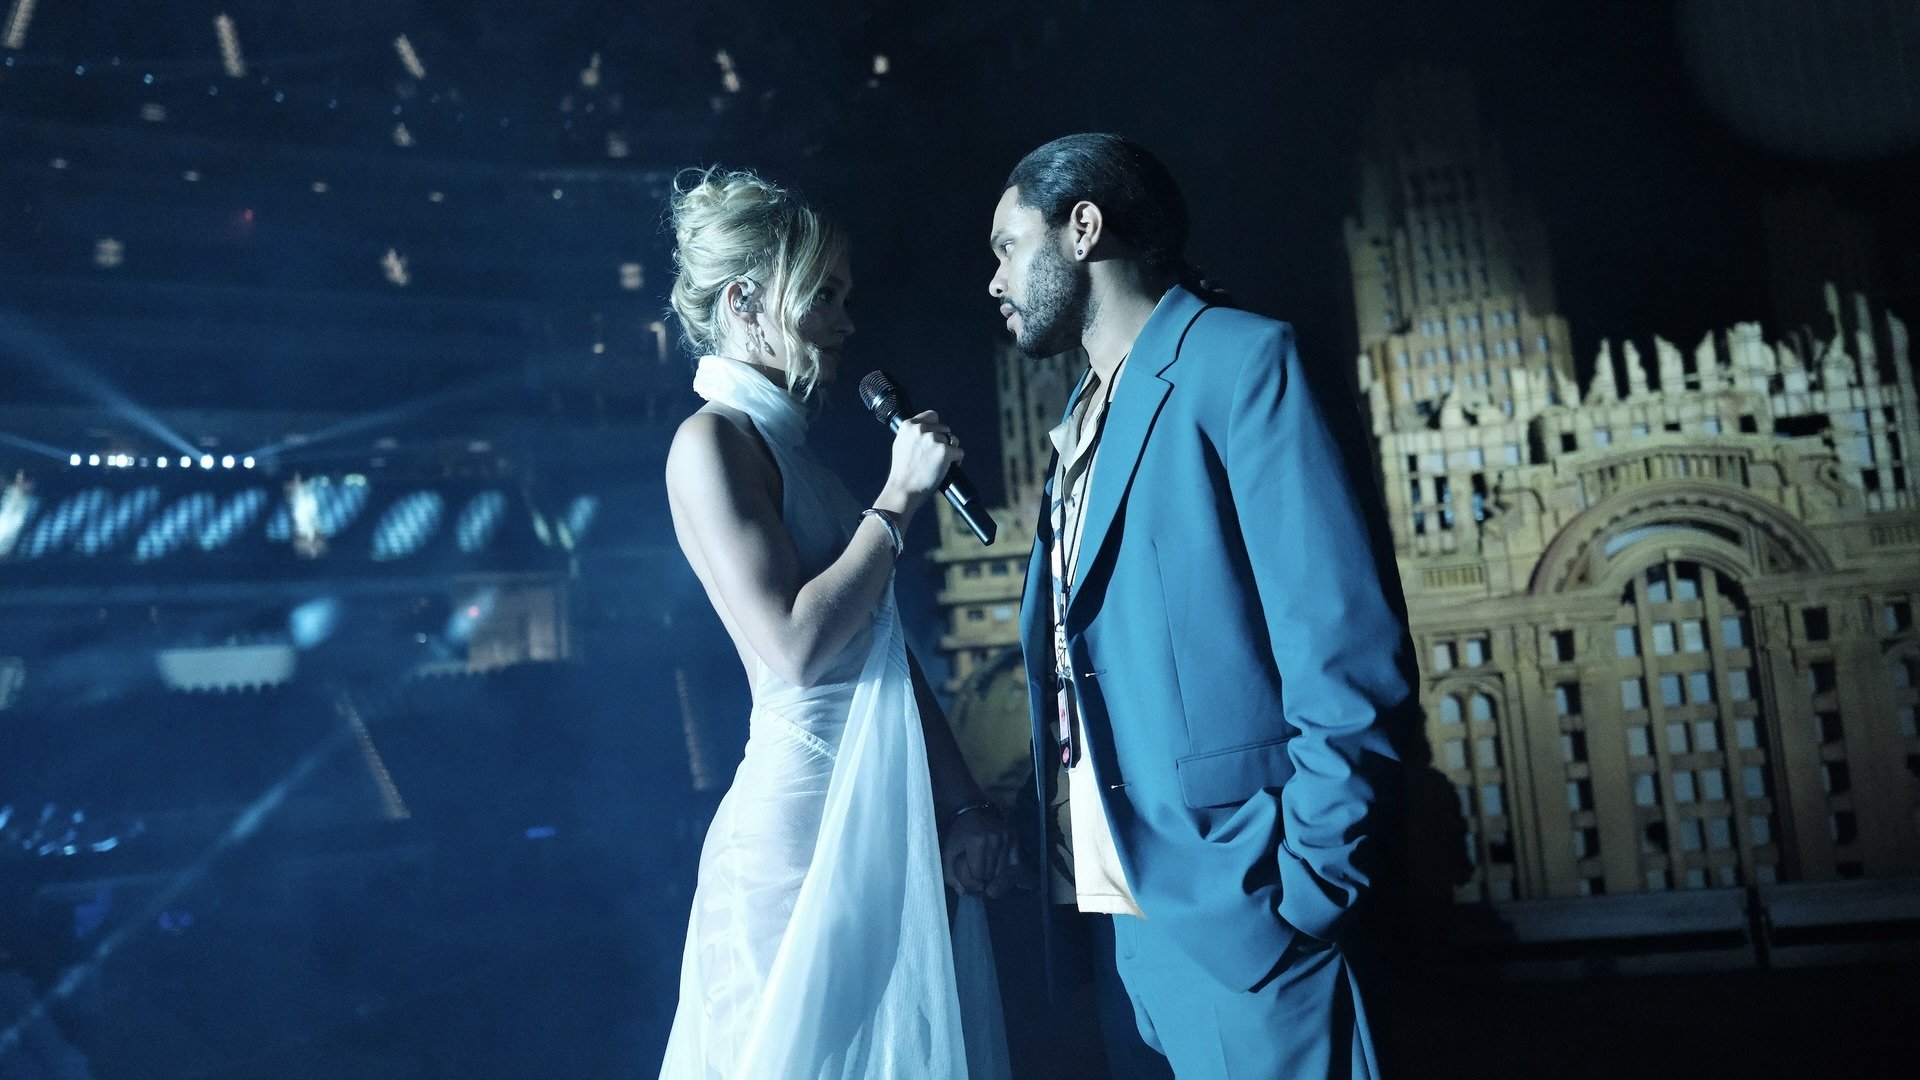 A woman in a white dress onstage at a stadium concert speaks to a man in a blue suit.